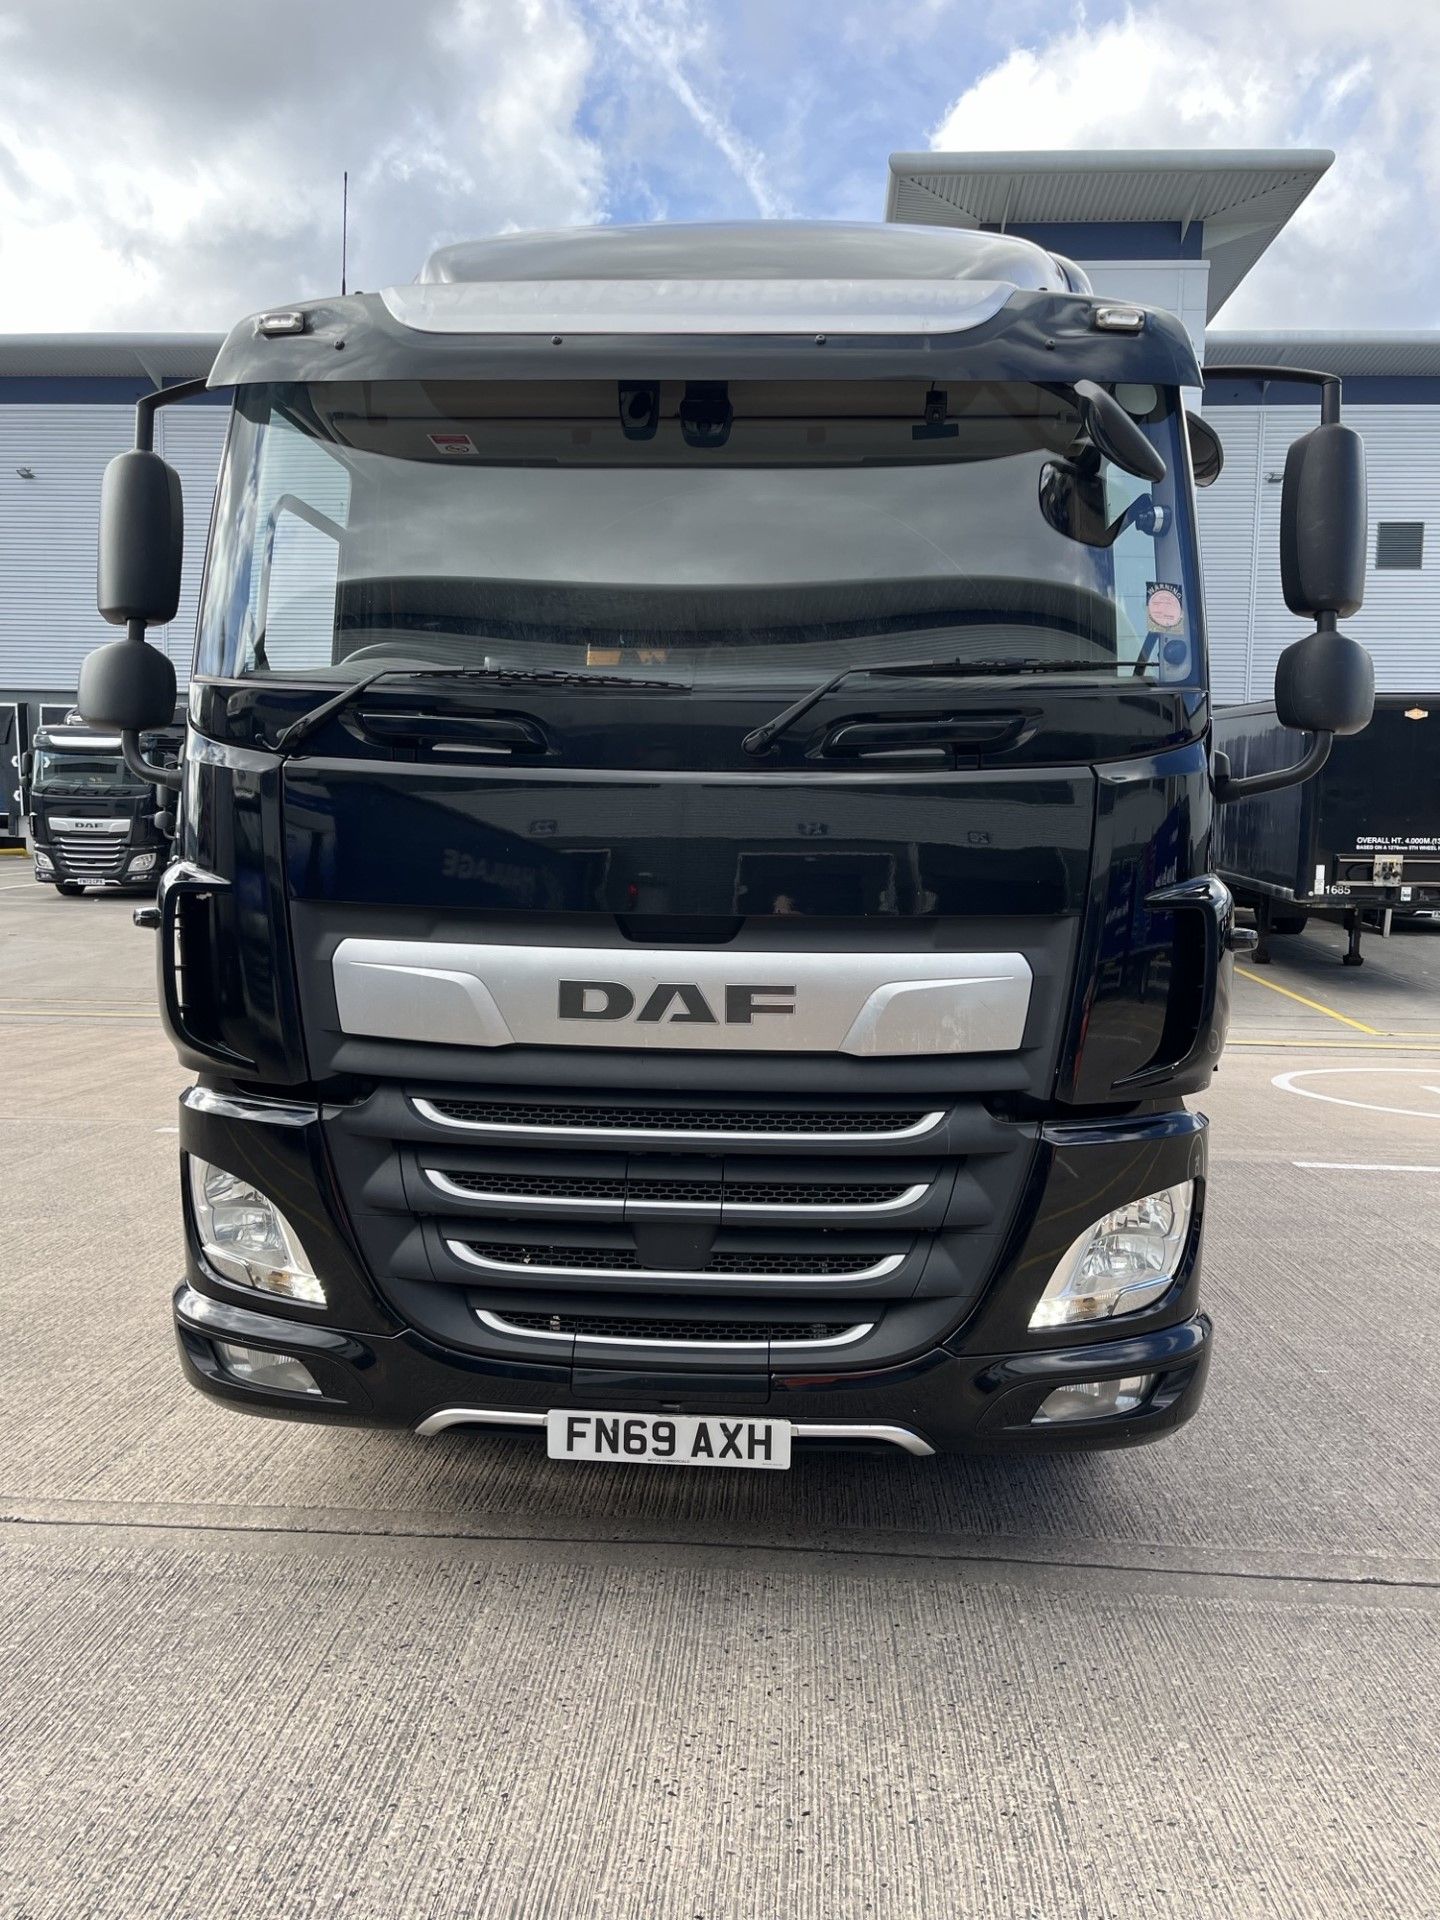 2019, DAF CF 260 FA (Ex-Fleet Owned & Maintained) - FN69 AXH (18 Ton Rigid Truck with Tail Lift) - Image 4 of 22